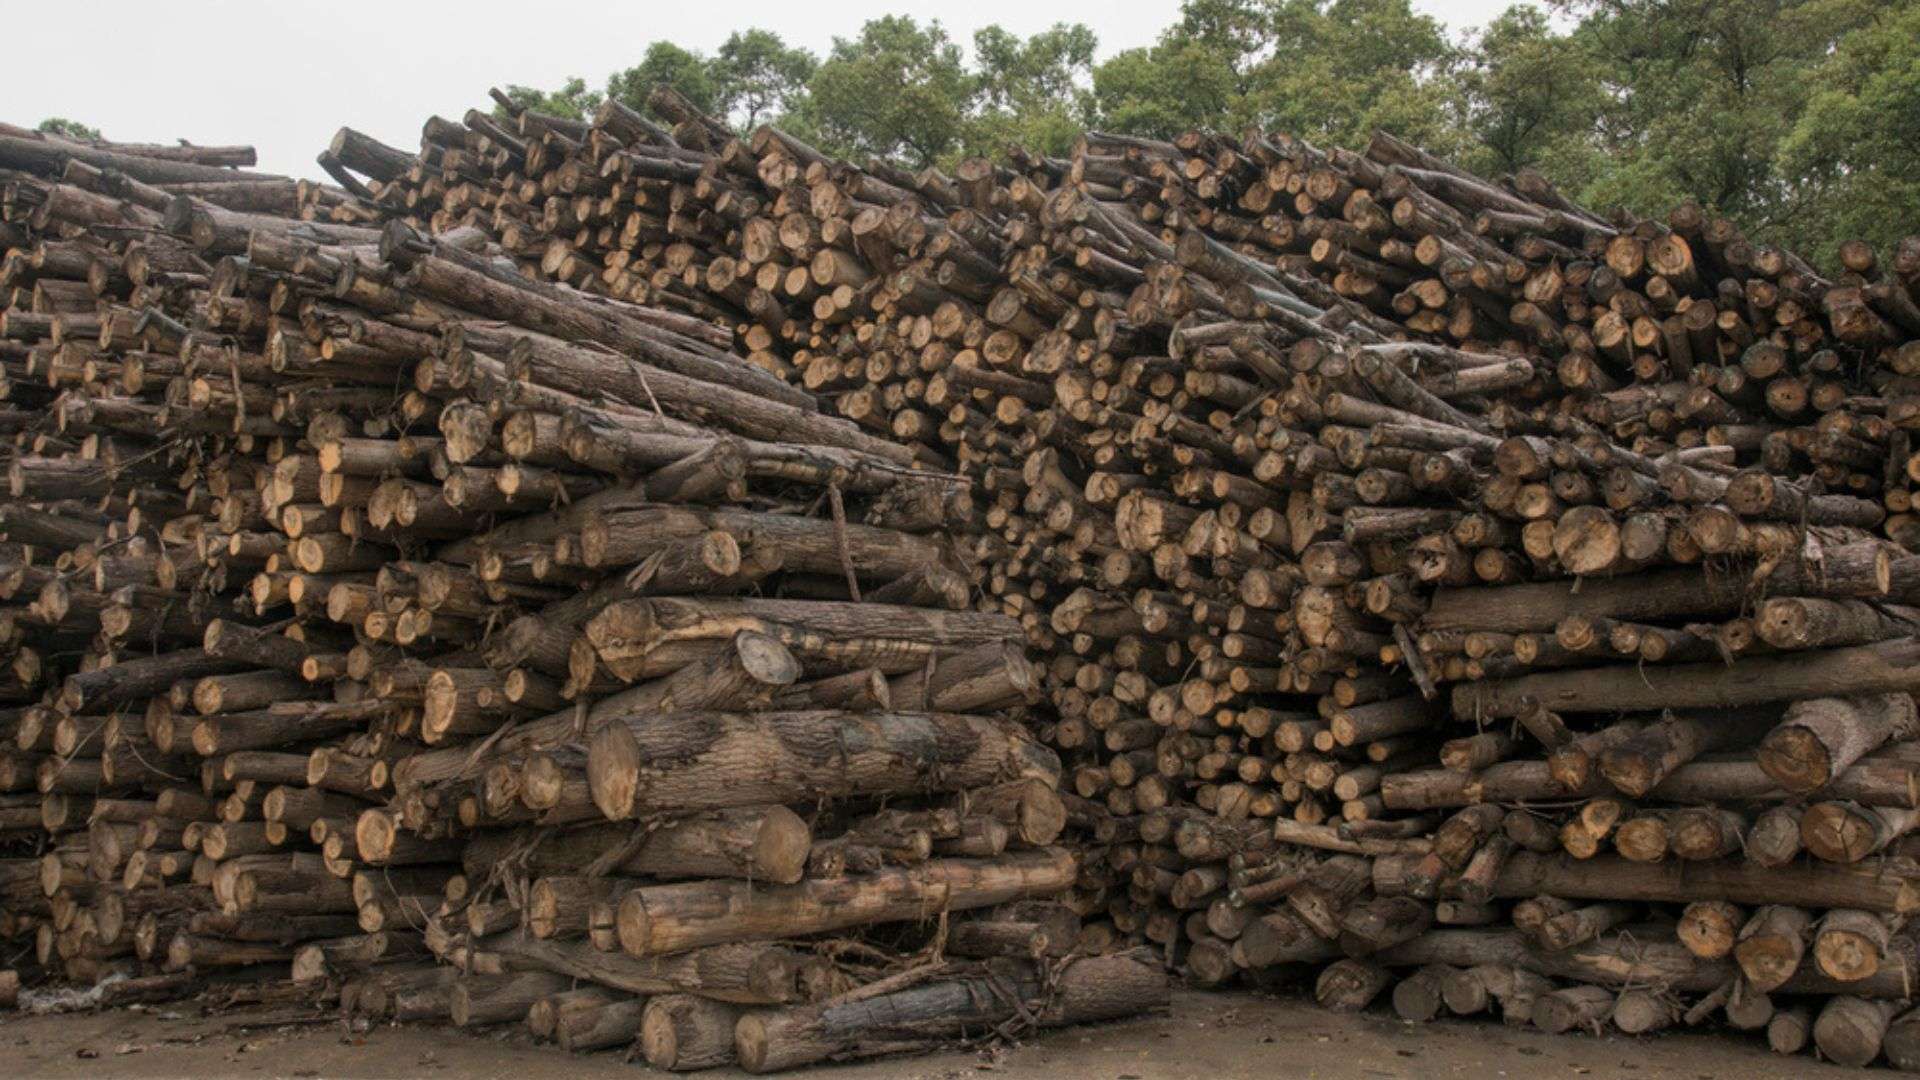 Wood stacked at a paper mill run by Yueyang Forest & Paper Co., Ltd, which is the parent company of Hunan Maoyuan Forestry Ltd, near Yueyang, Hunan, China.